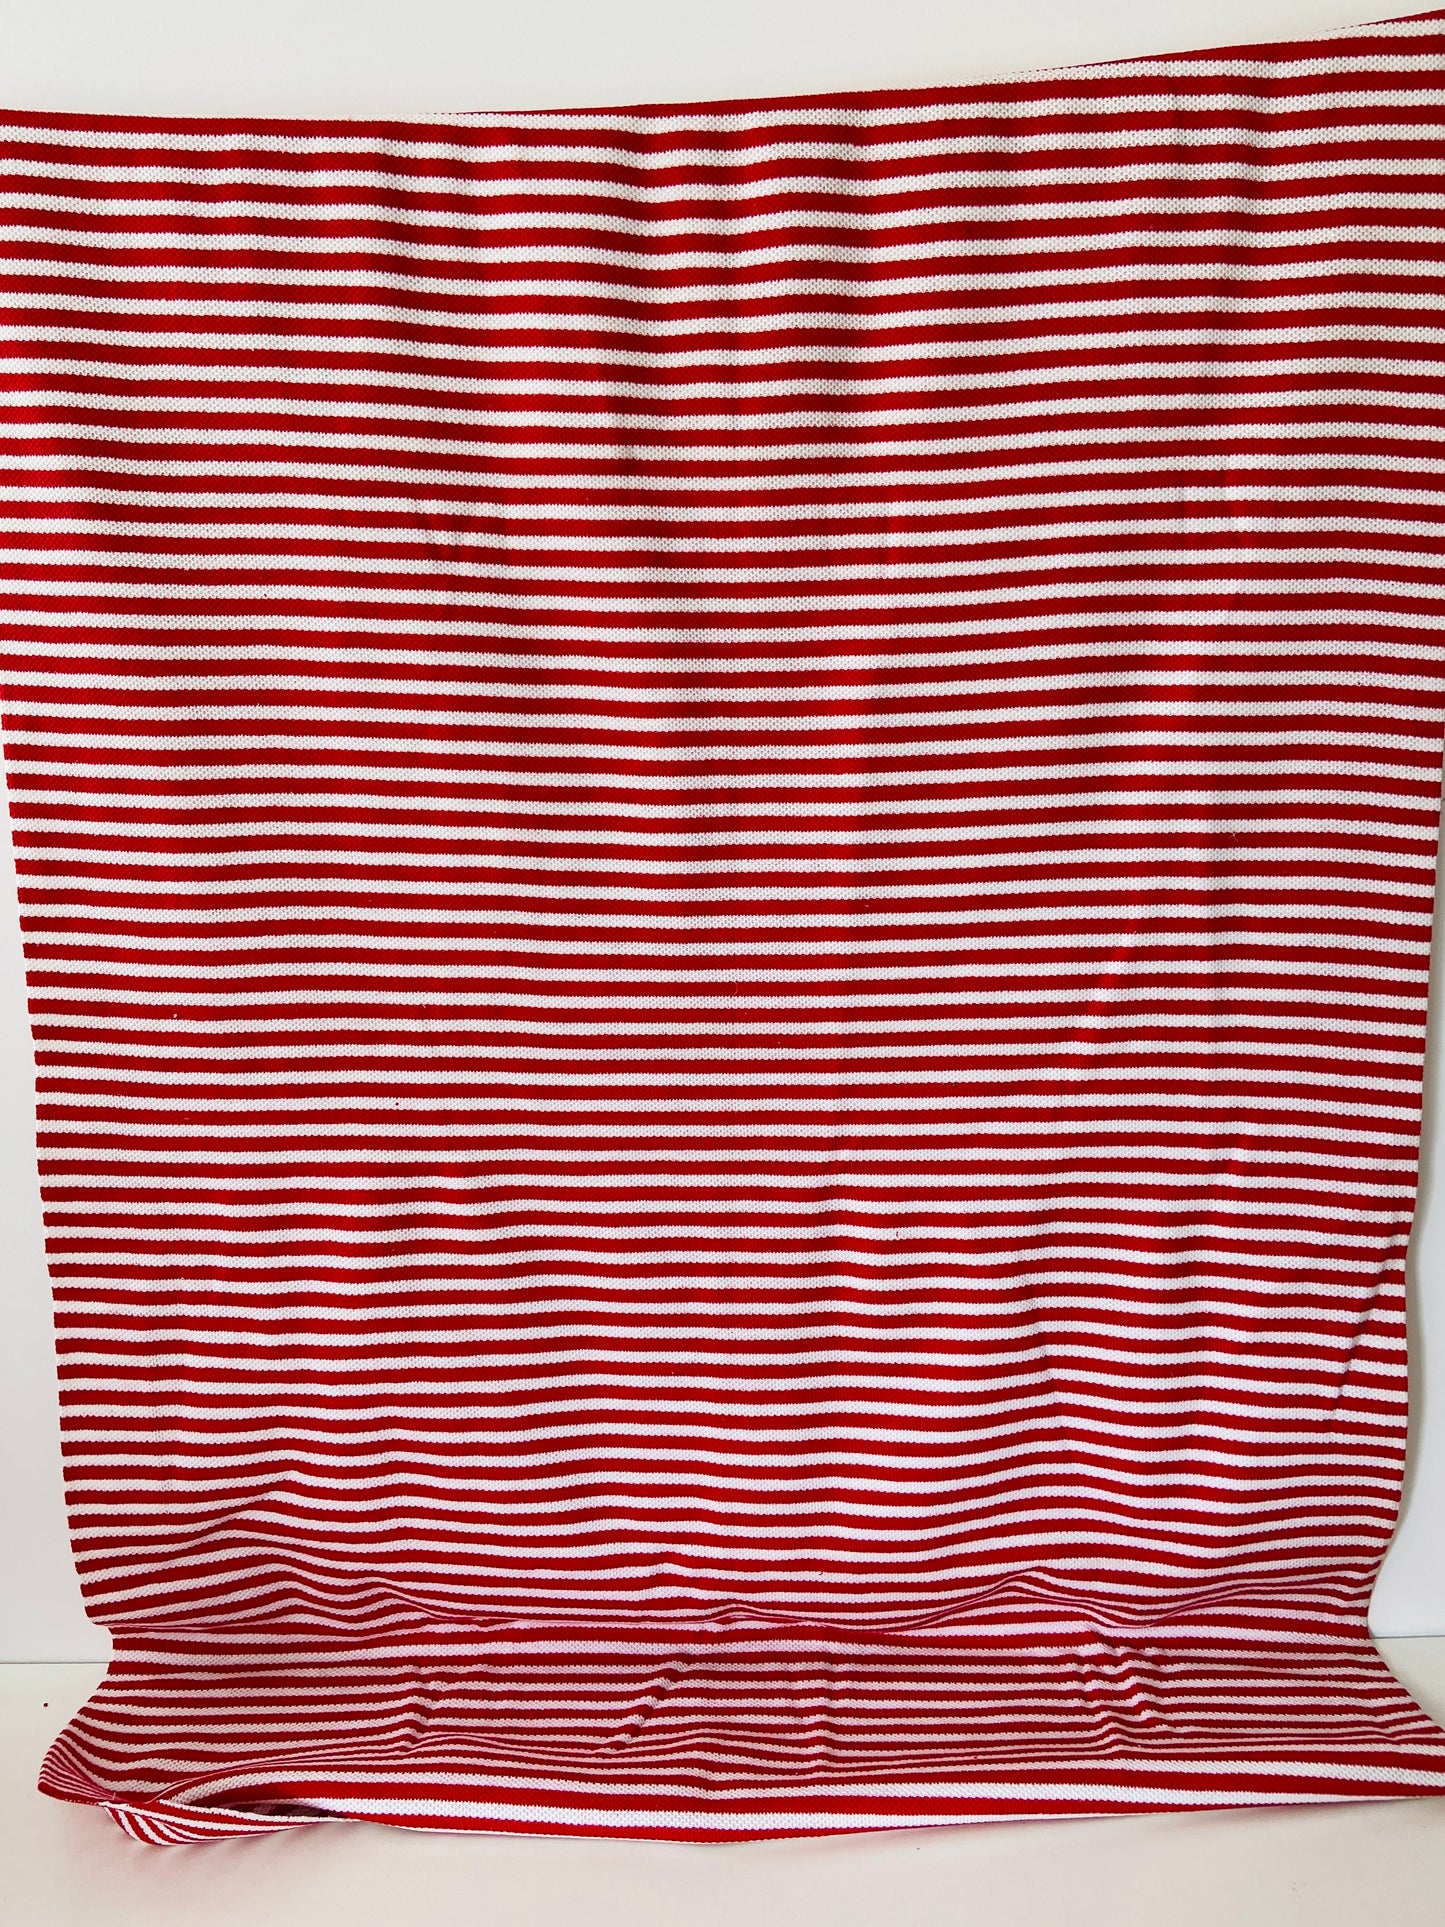 approx 280cms FAB Red & White Striped FABRIC Beach Bag Clothing